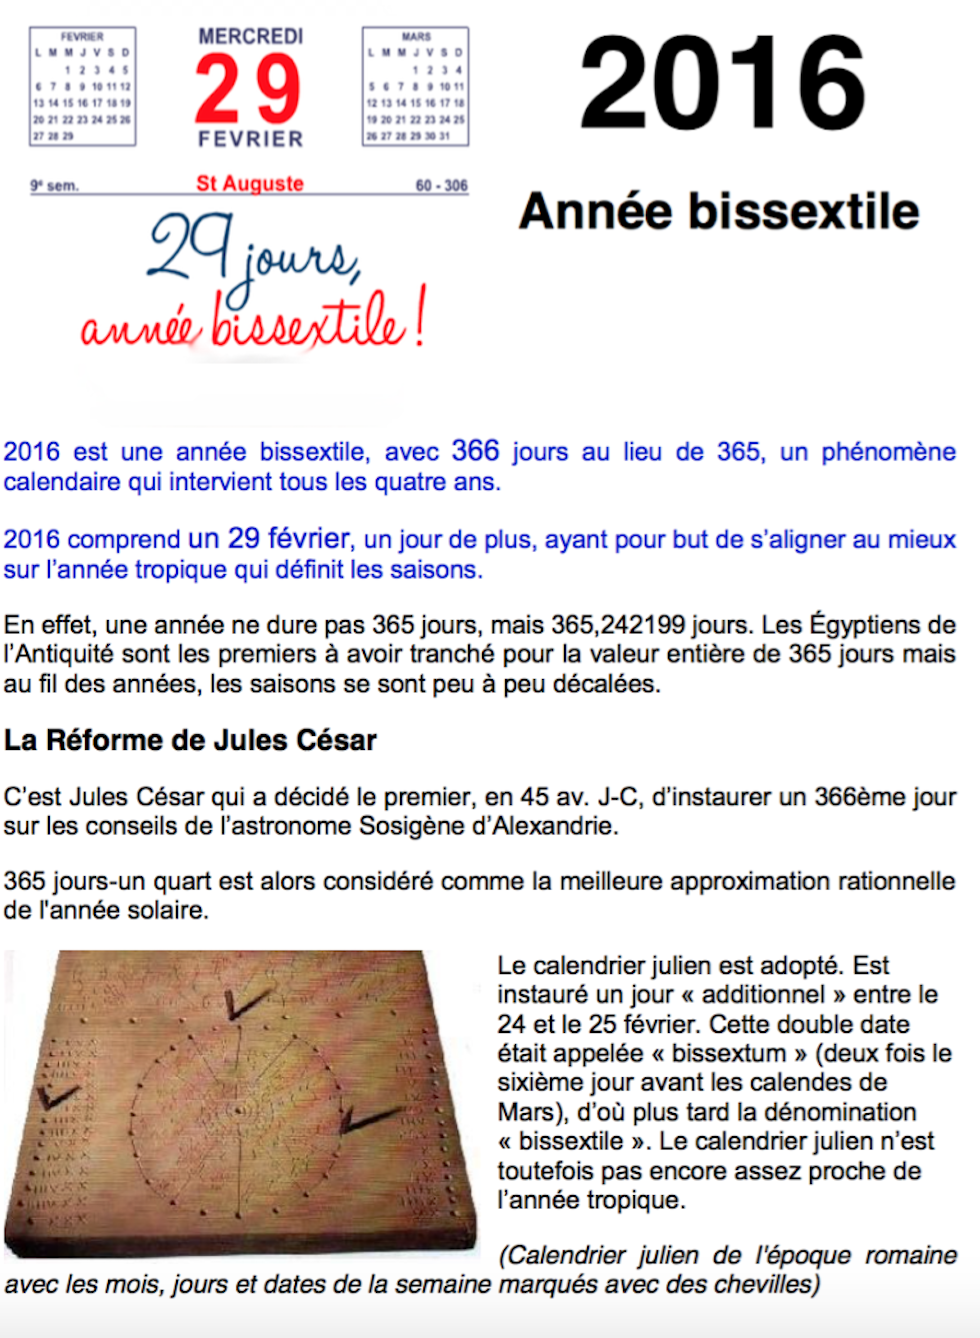 annee bisectile